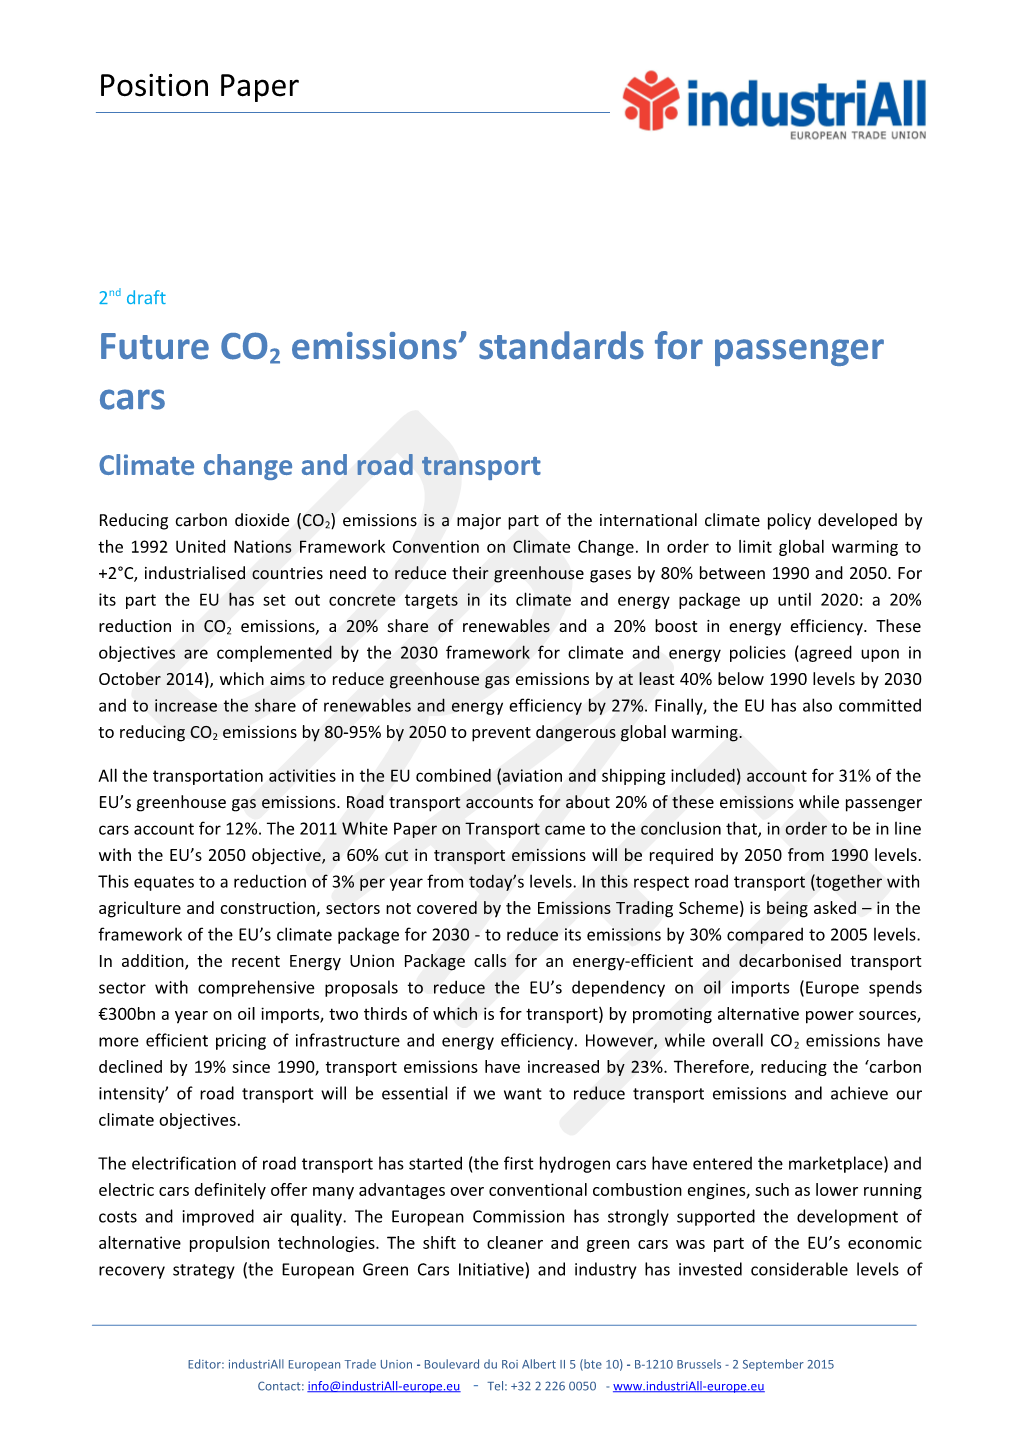 Future CO2 Emissions Standards for Passenger Cars